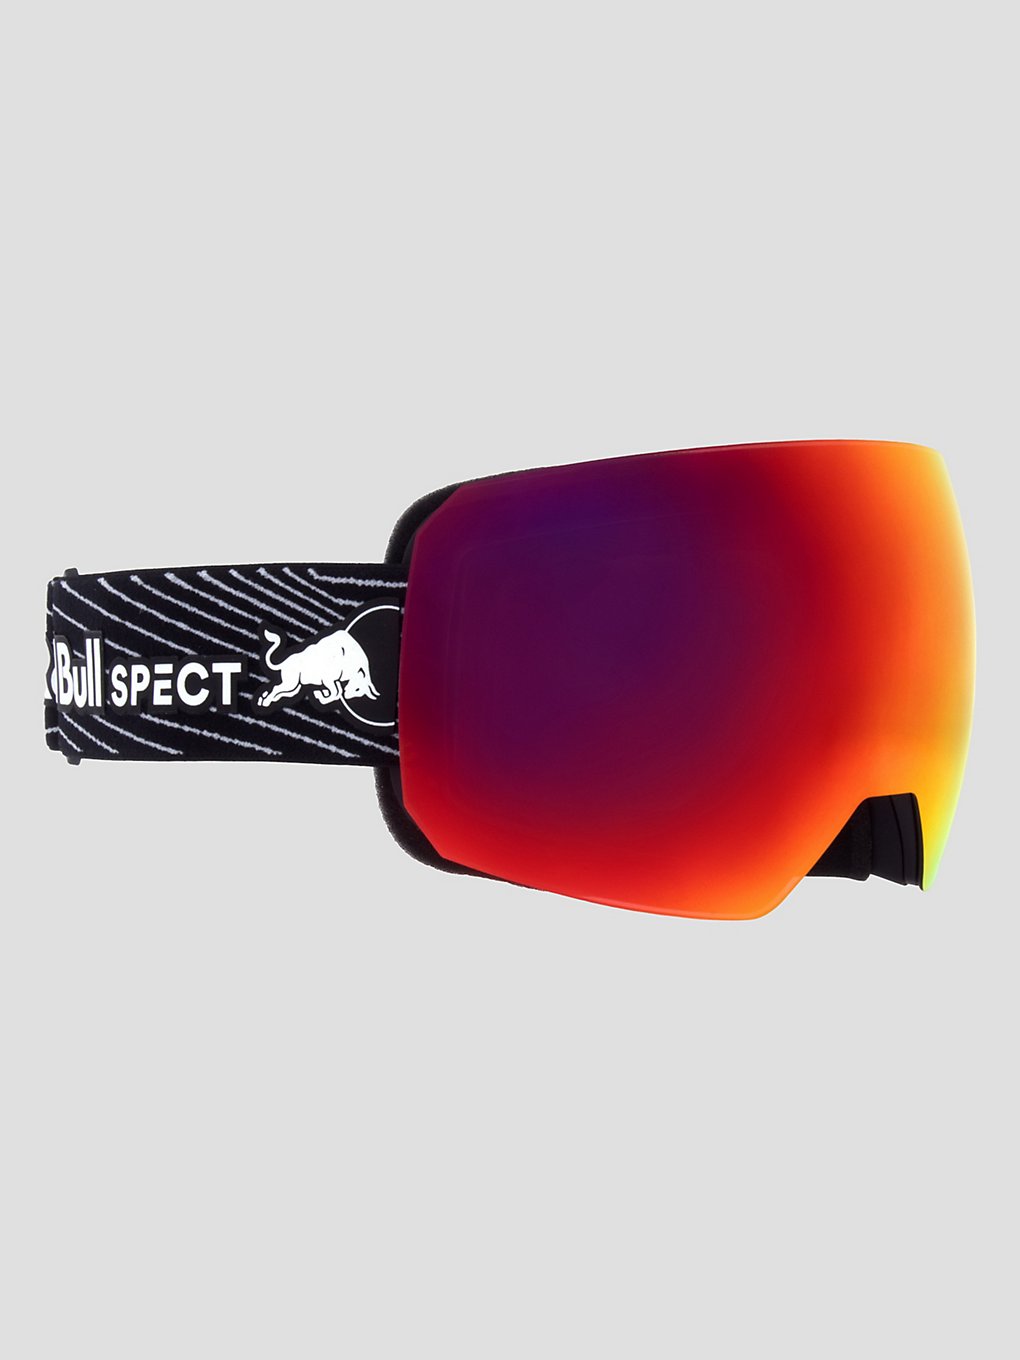 Red Bull SPECT Eyewear REIGN-01 Black Goggle brown with gold mirror kaufen